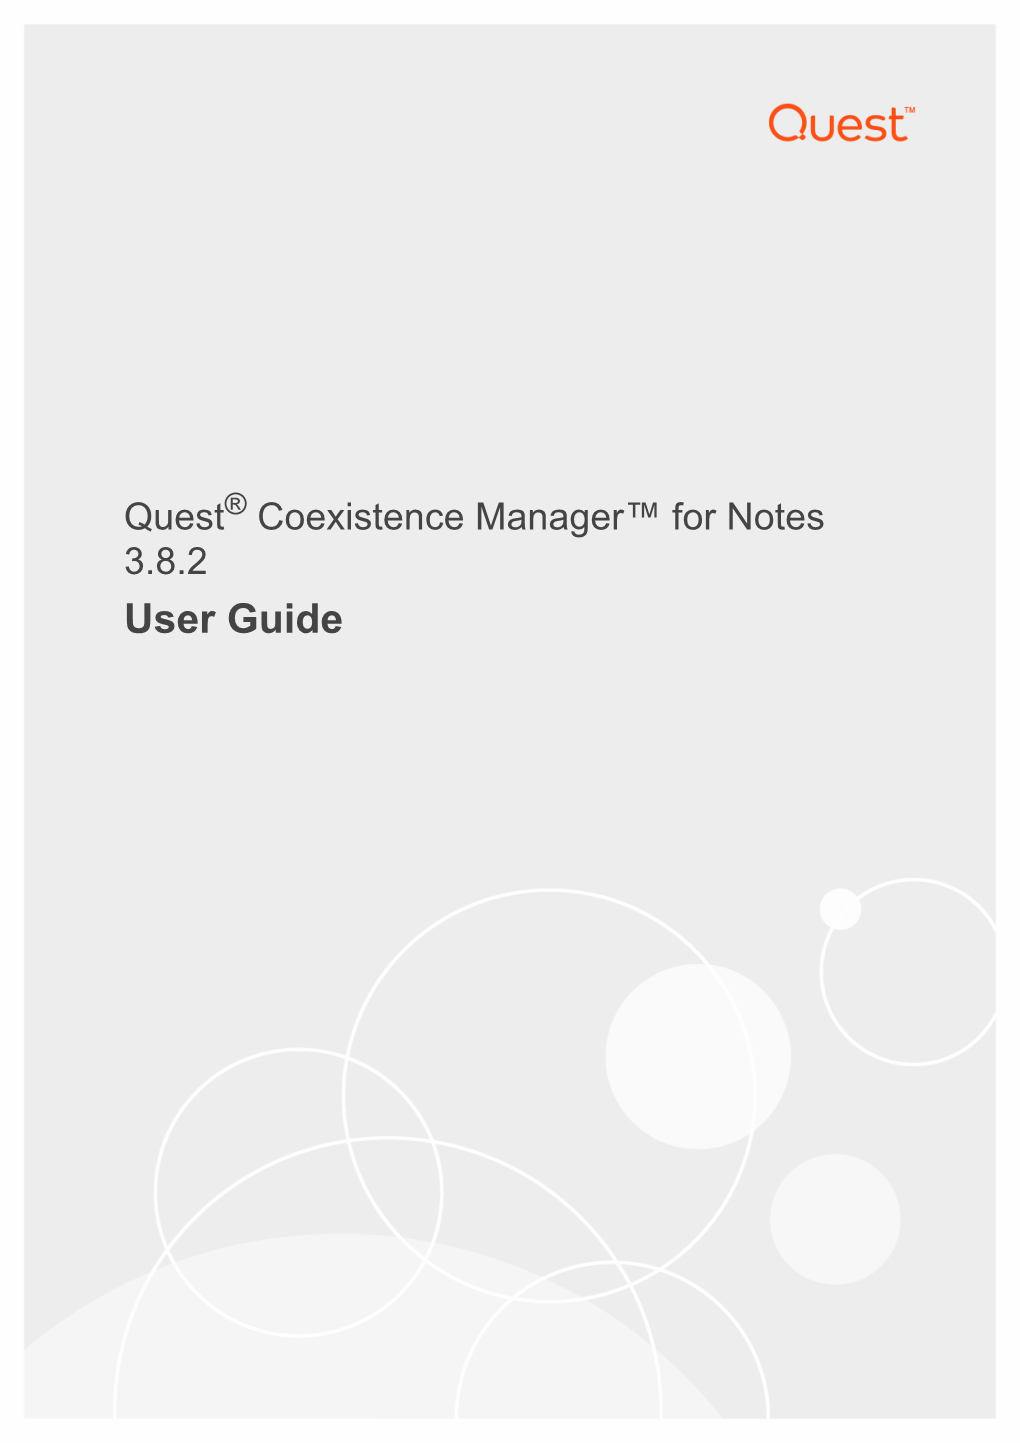 Quest Coexistence Manager for Notes 3.8 User Guide